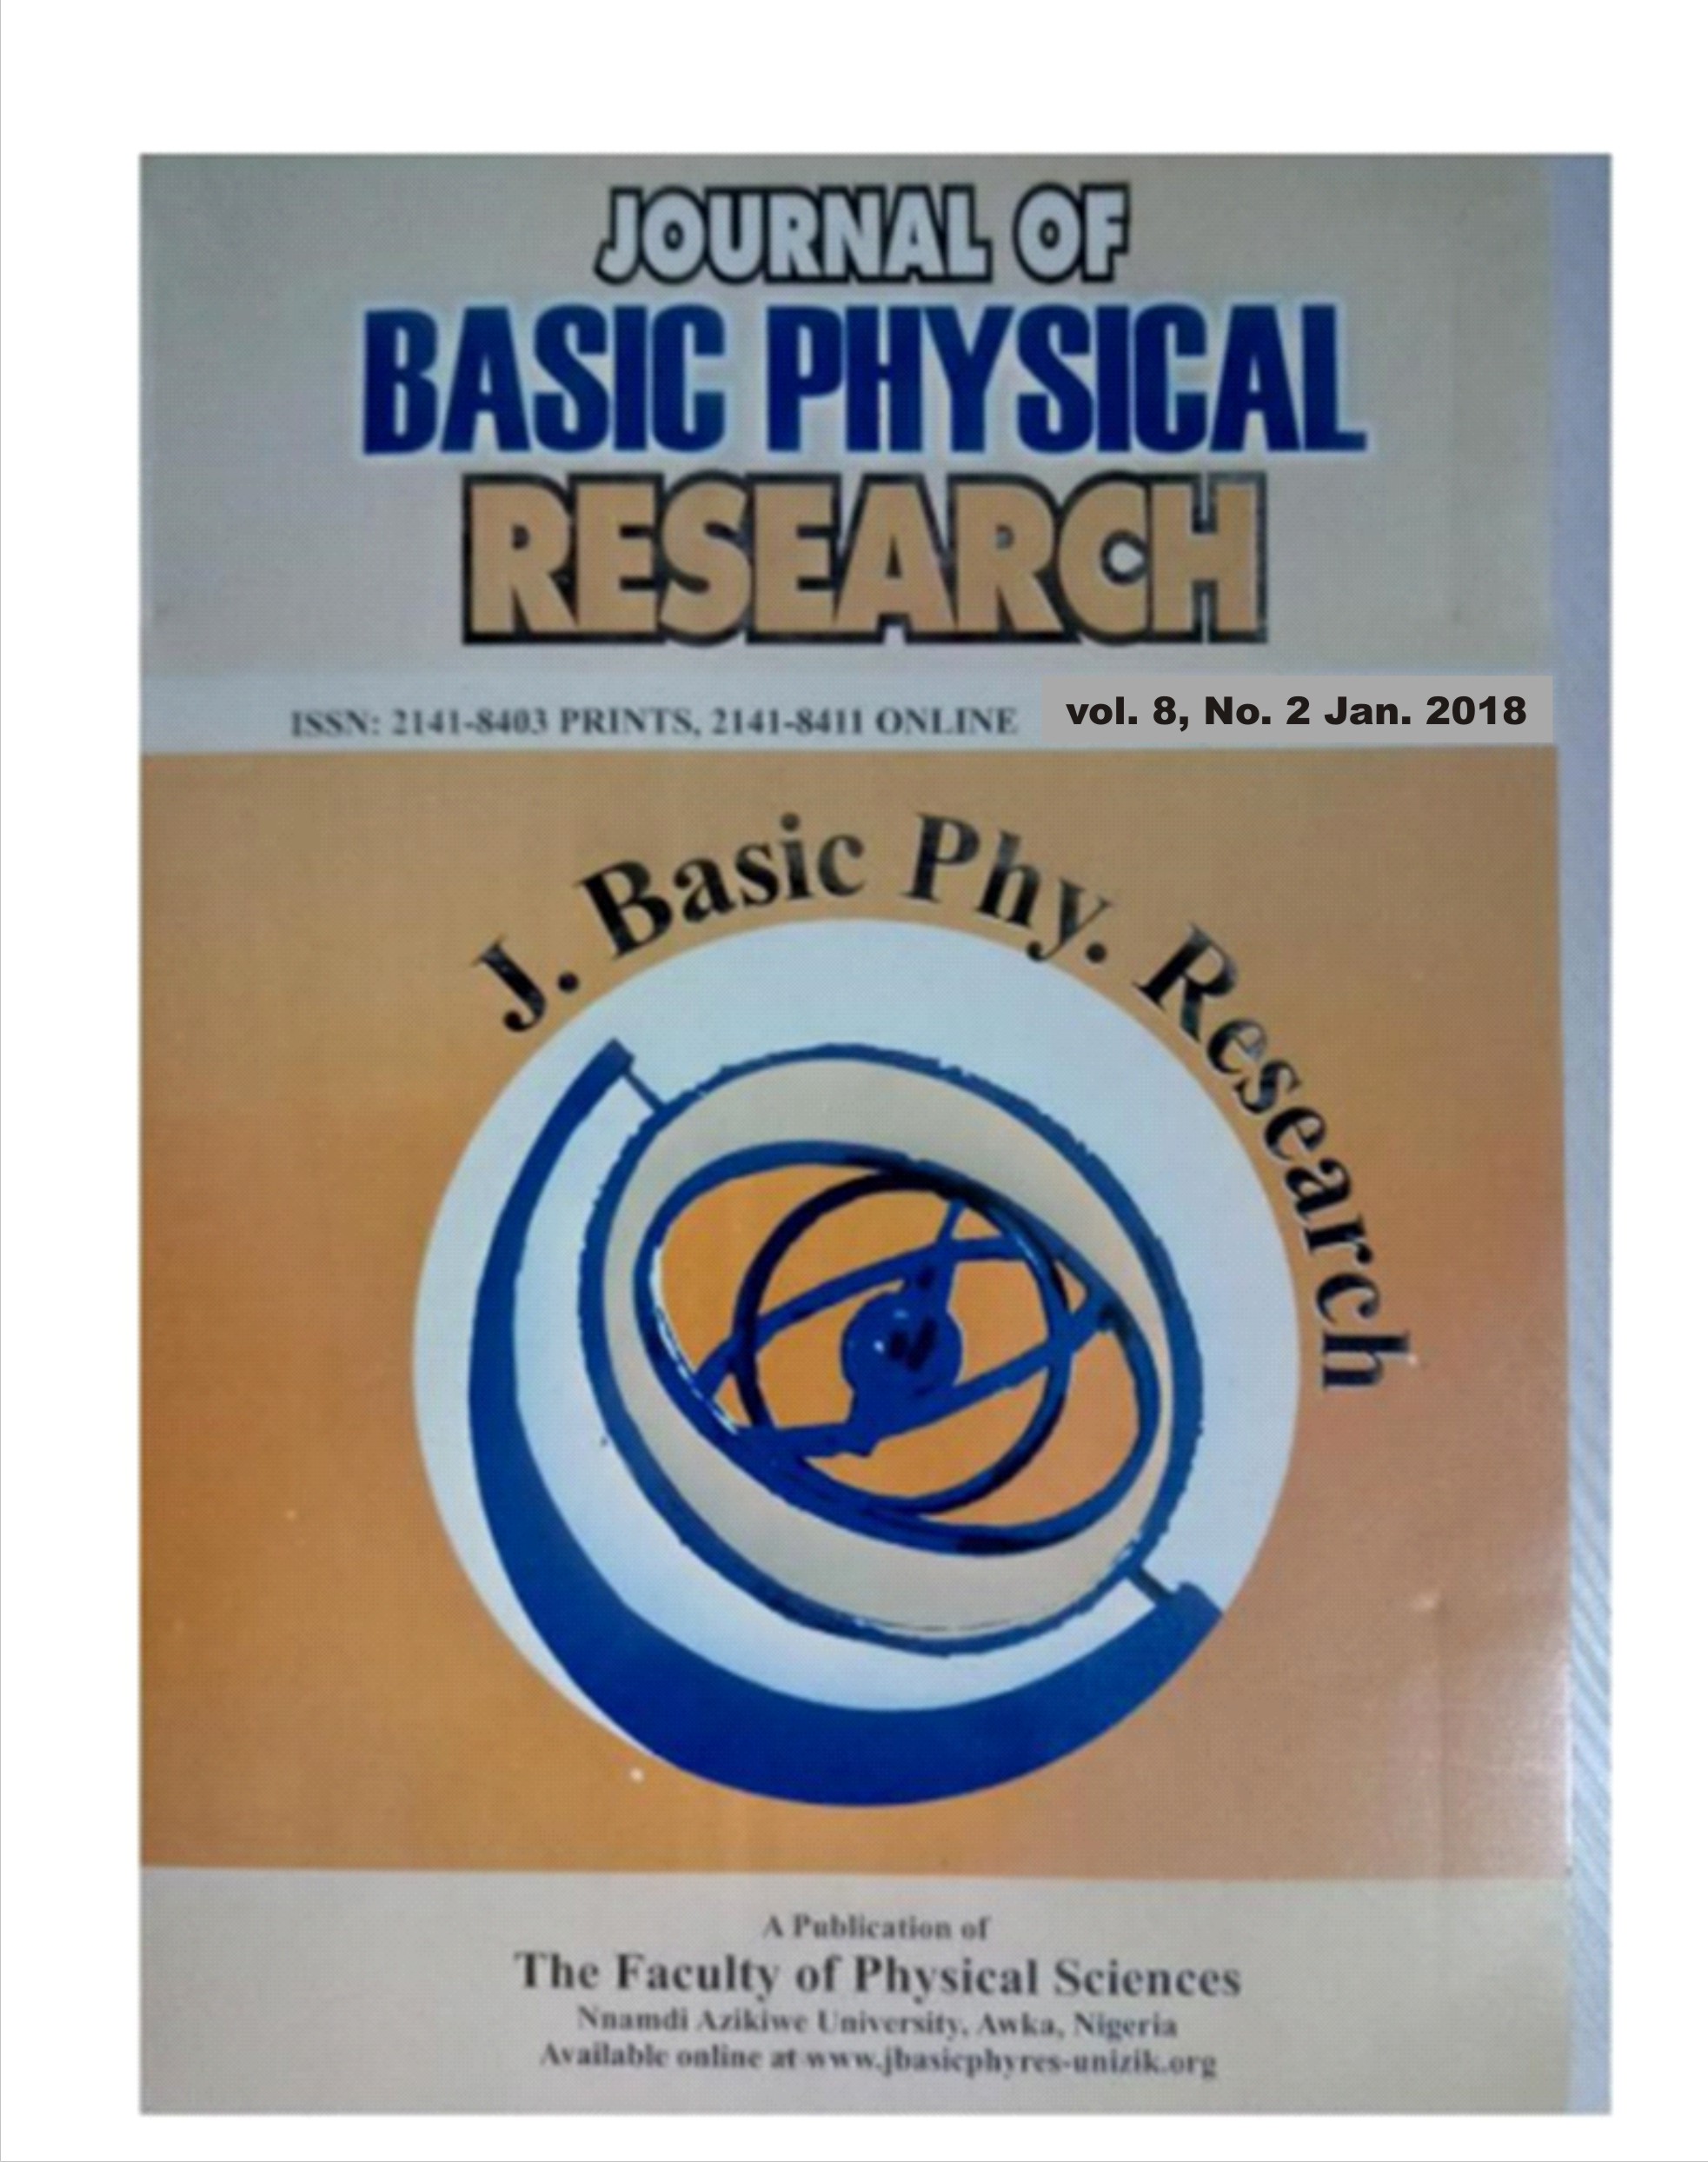 JOURNAL OF BASIC PHYSICAL RESEARCH